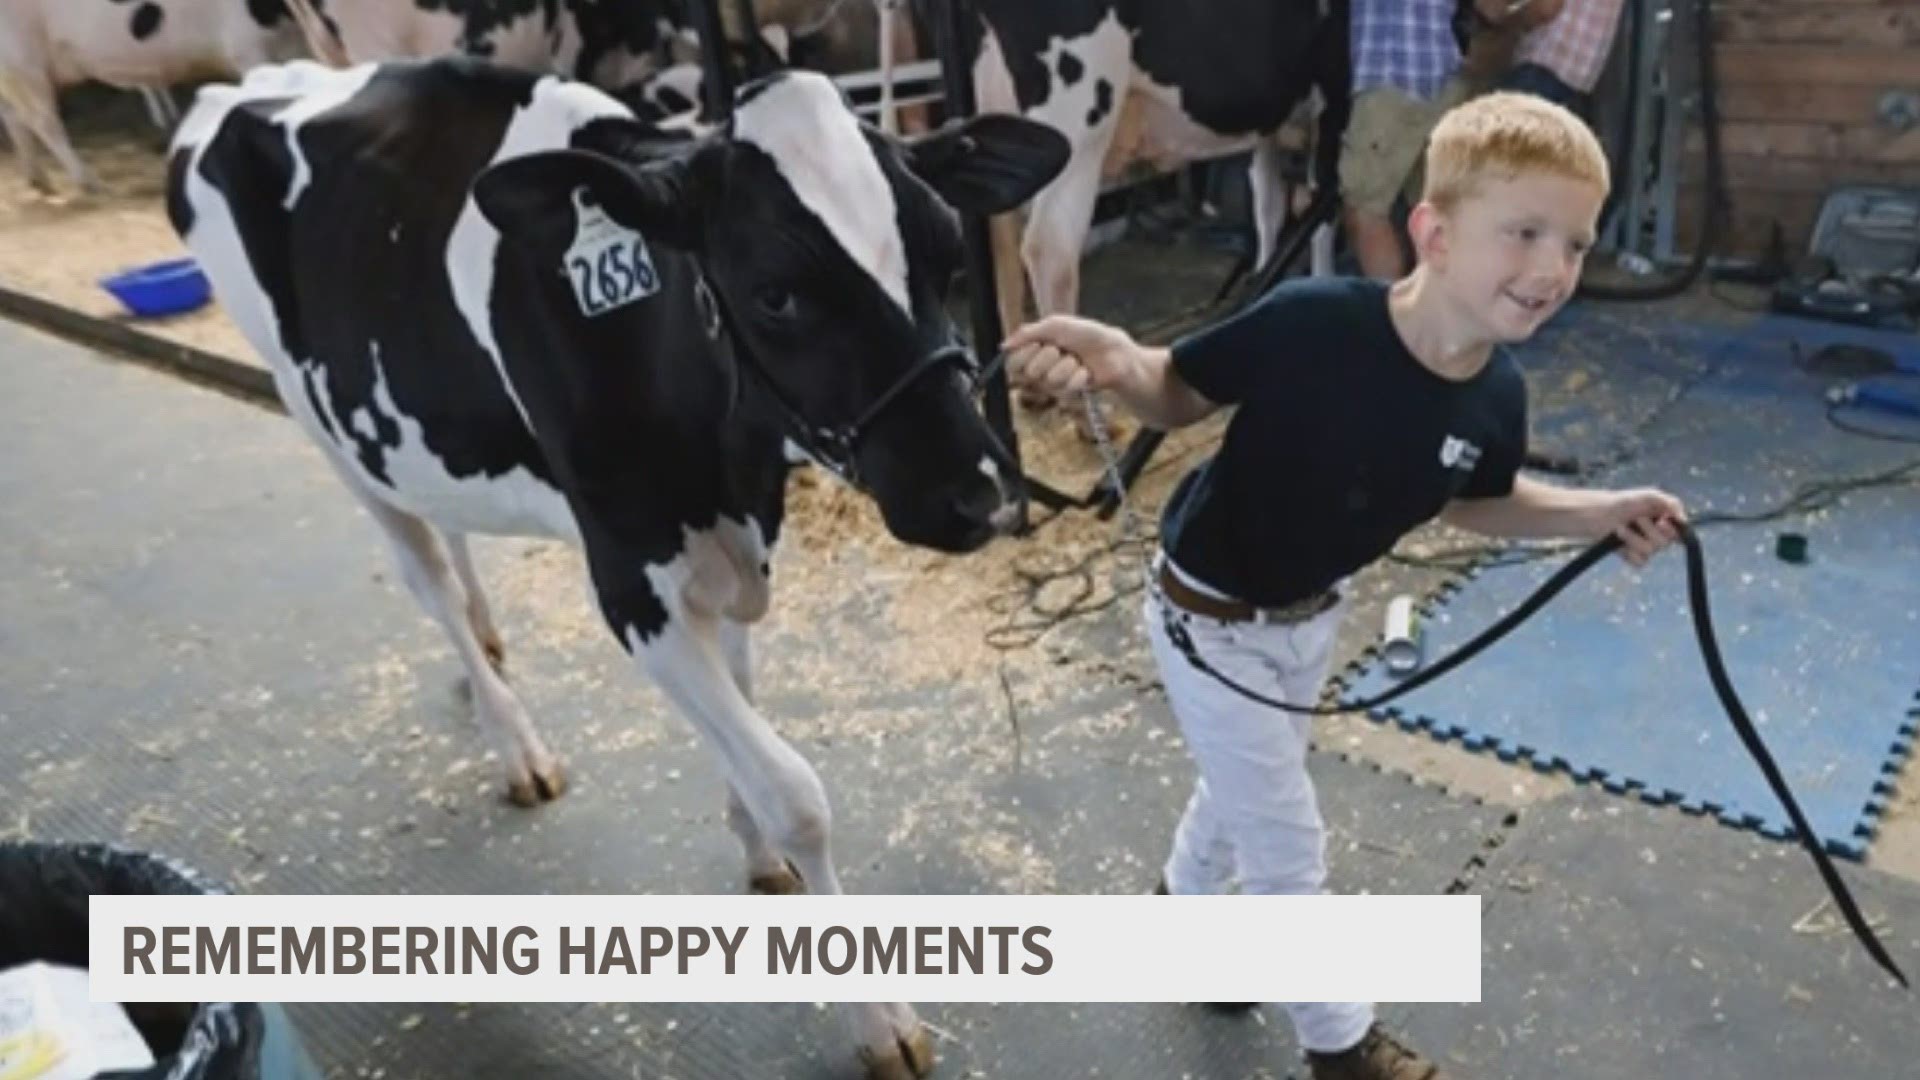 Revisiting our favorite pandemic Happy Moments with a look back at the Iowa State Fair